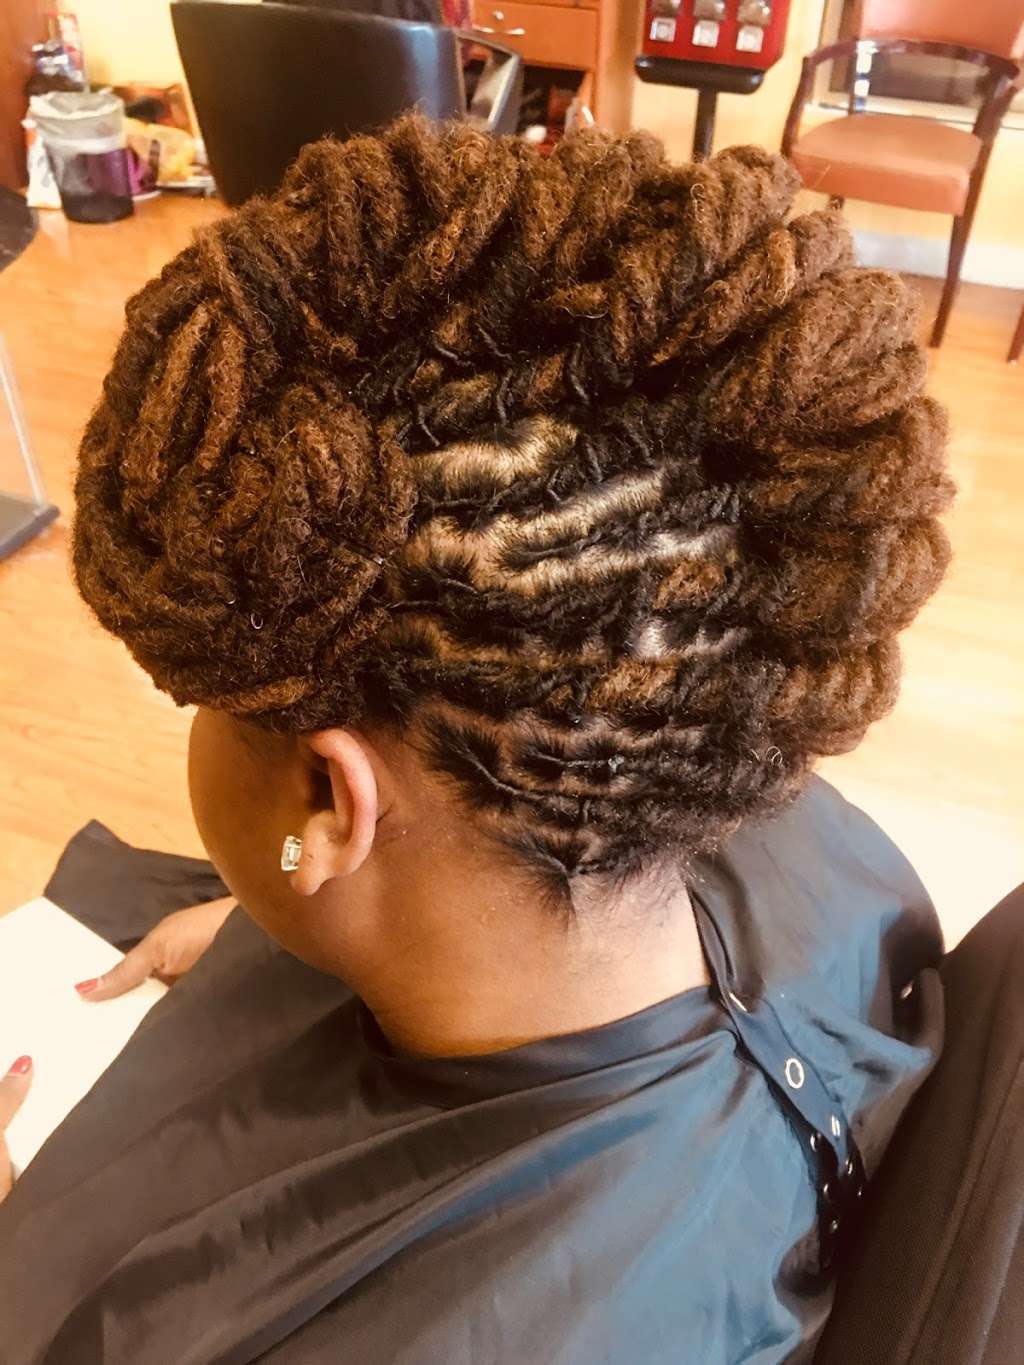 TWISTED ROOTS SALON | 701 E 75th St, Chicago, IL 60619 | Phone: (773) 994-9878